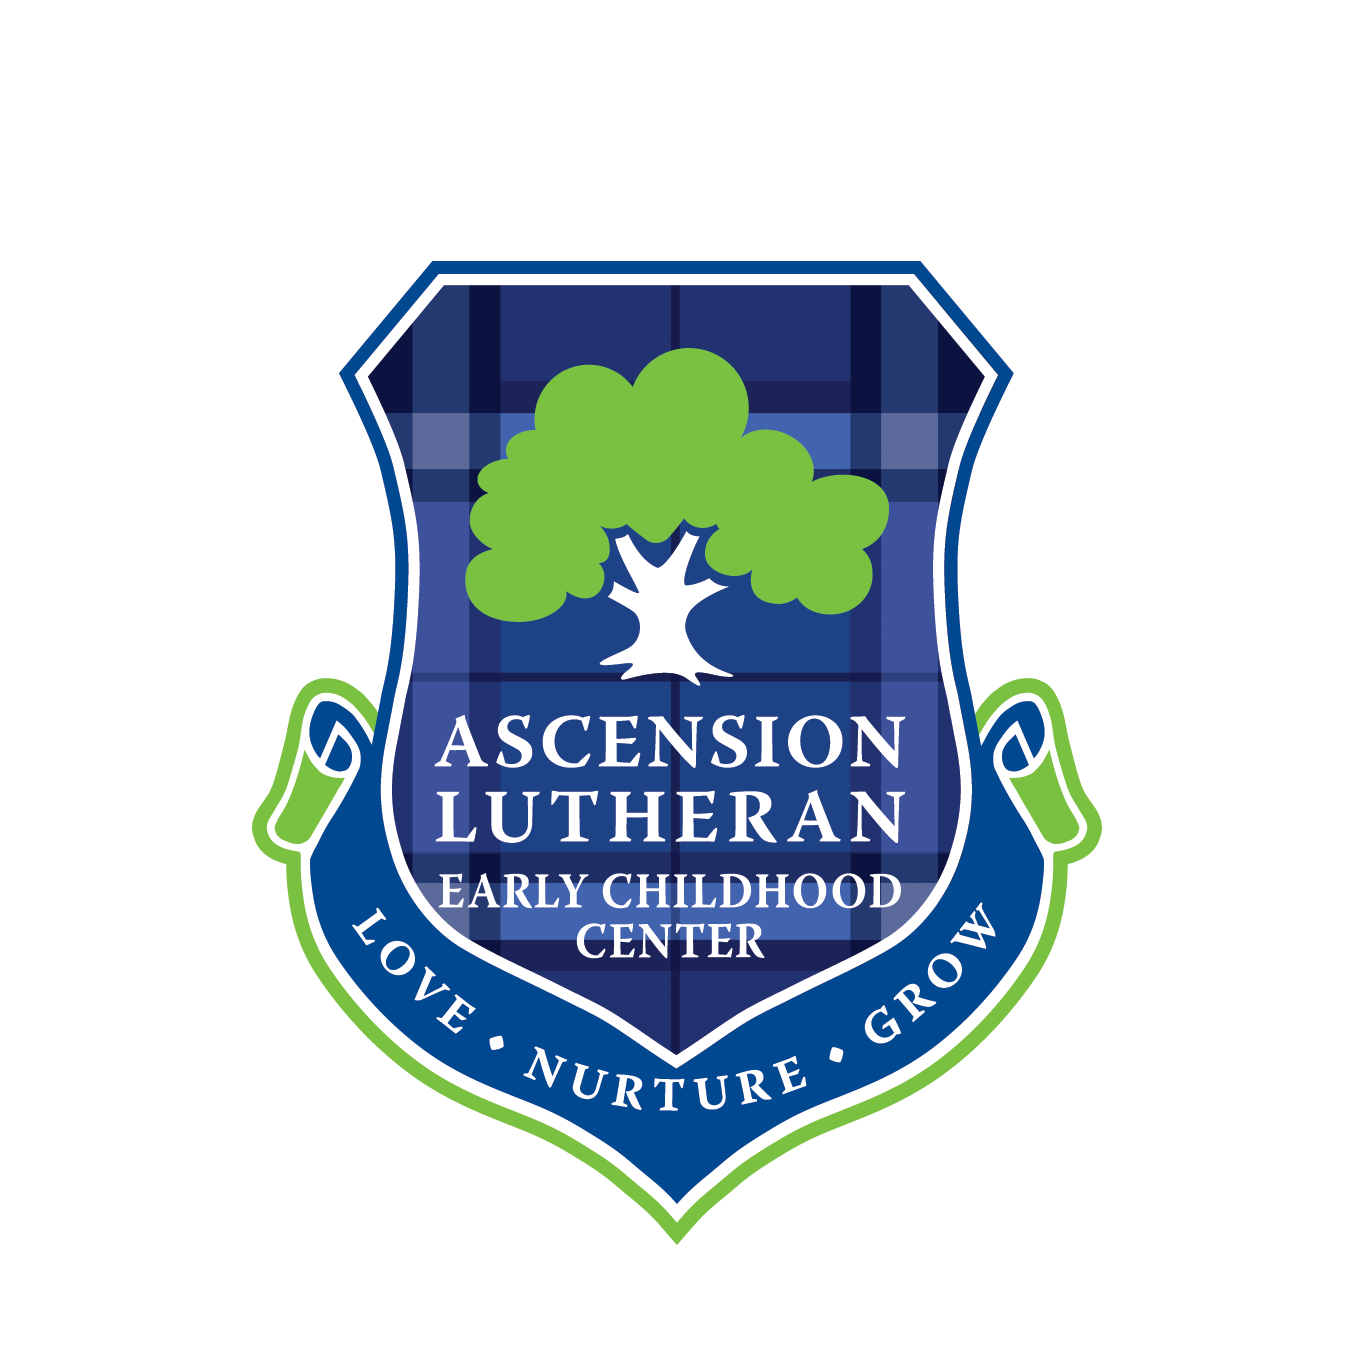 Ascension Lutheran Early Childhood Center logo